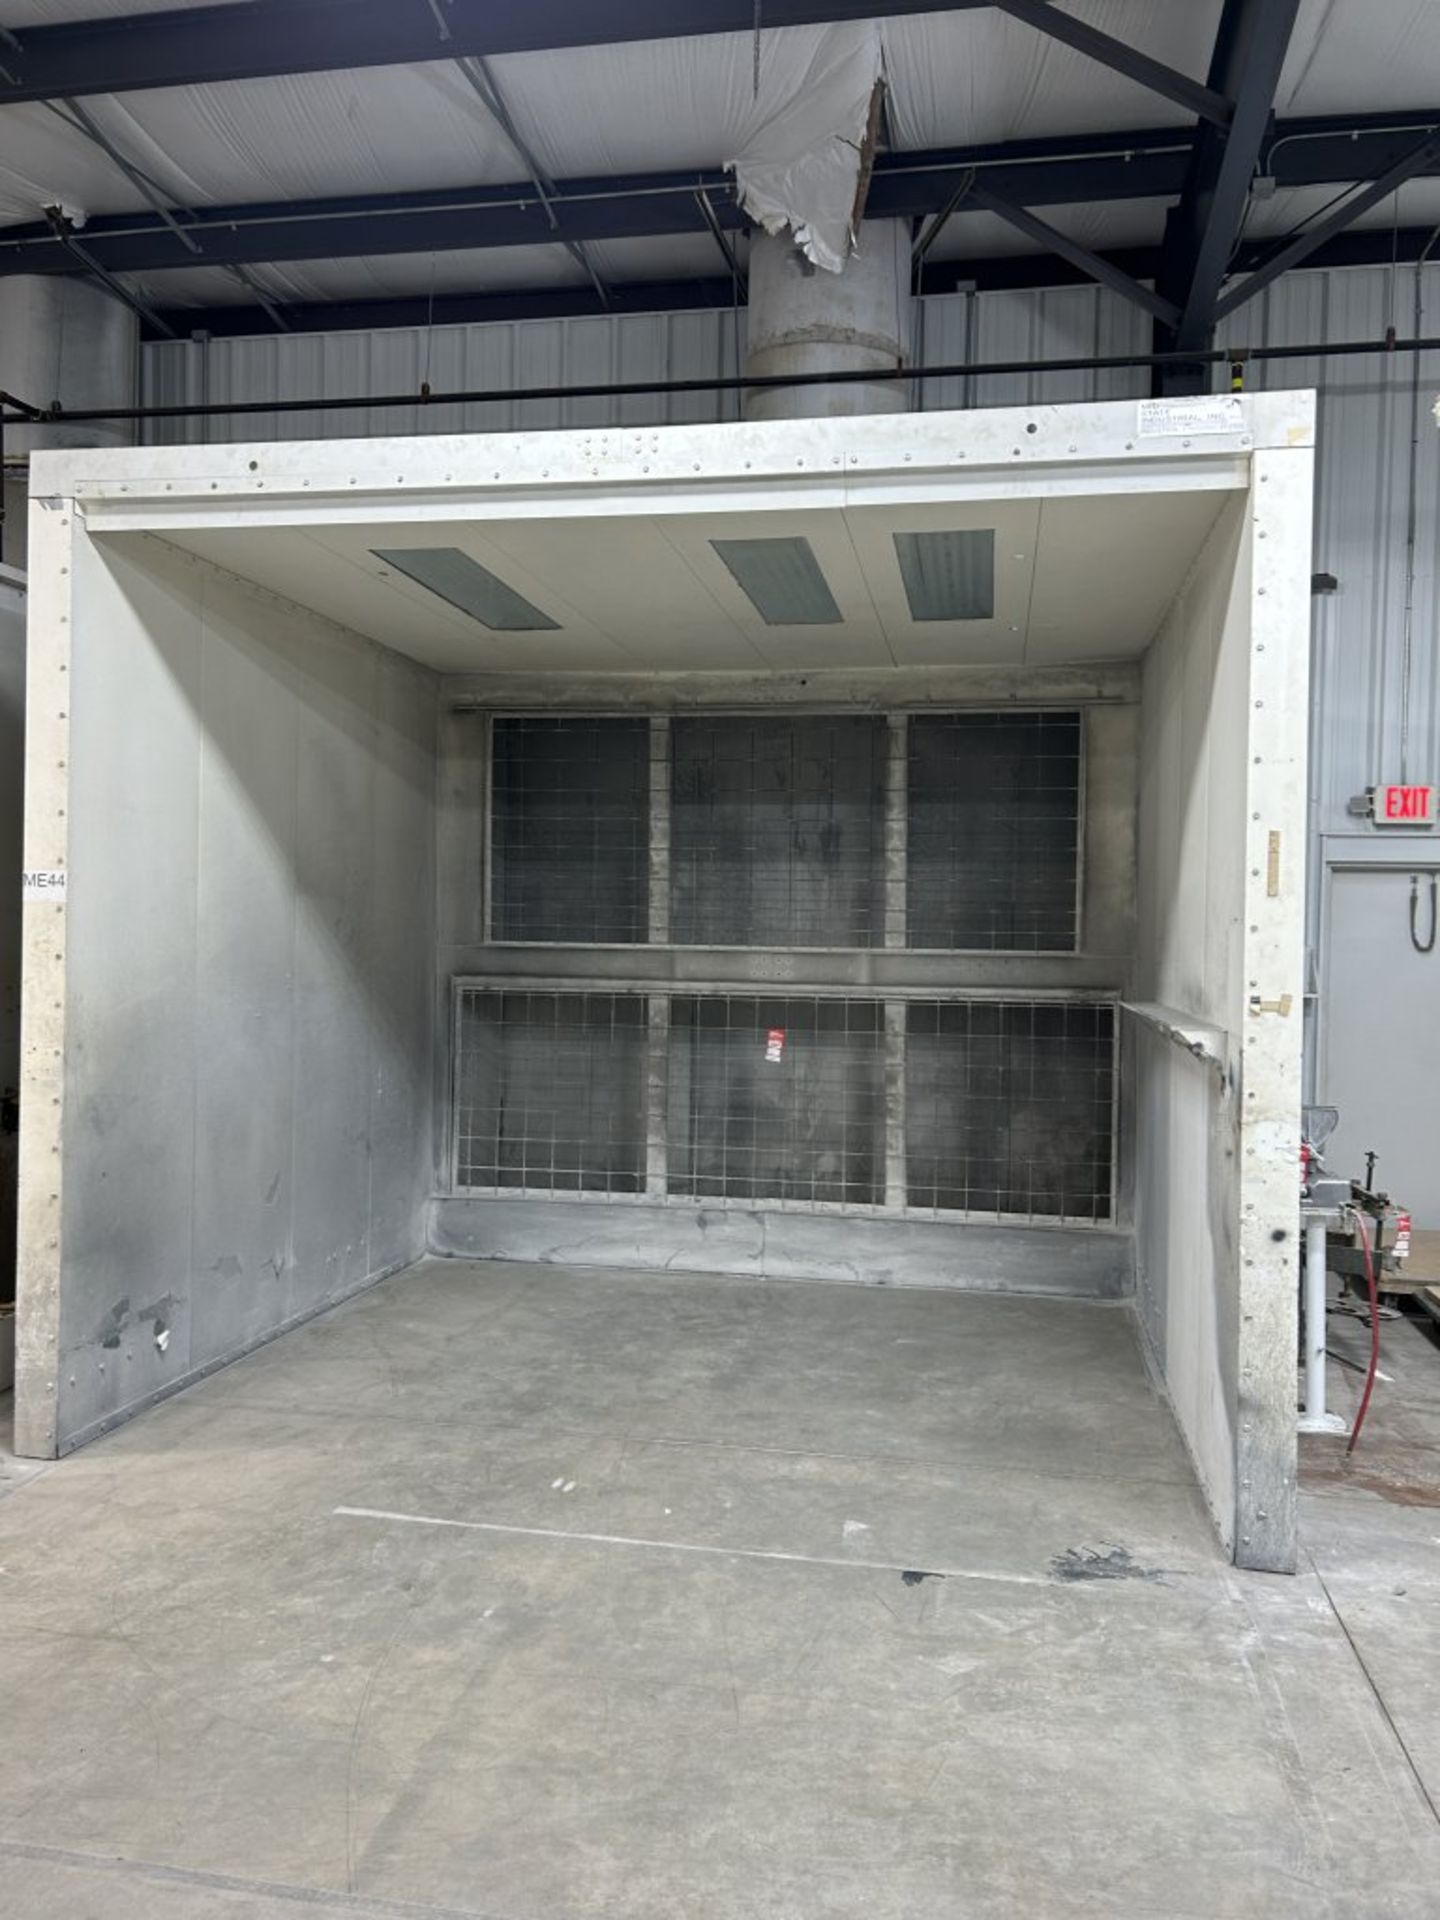 MID-STATE INDUSTRIAL PAINT BOOTH, 13' X 13.5' X 10.5', BUYER IS RESPONSIBLE FOR PROPER REMOVAL - Image 2 of 11